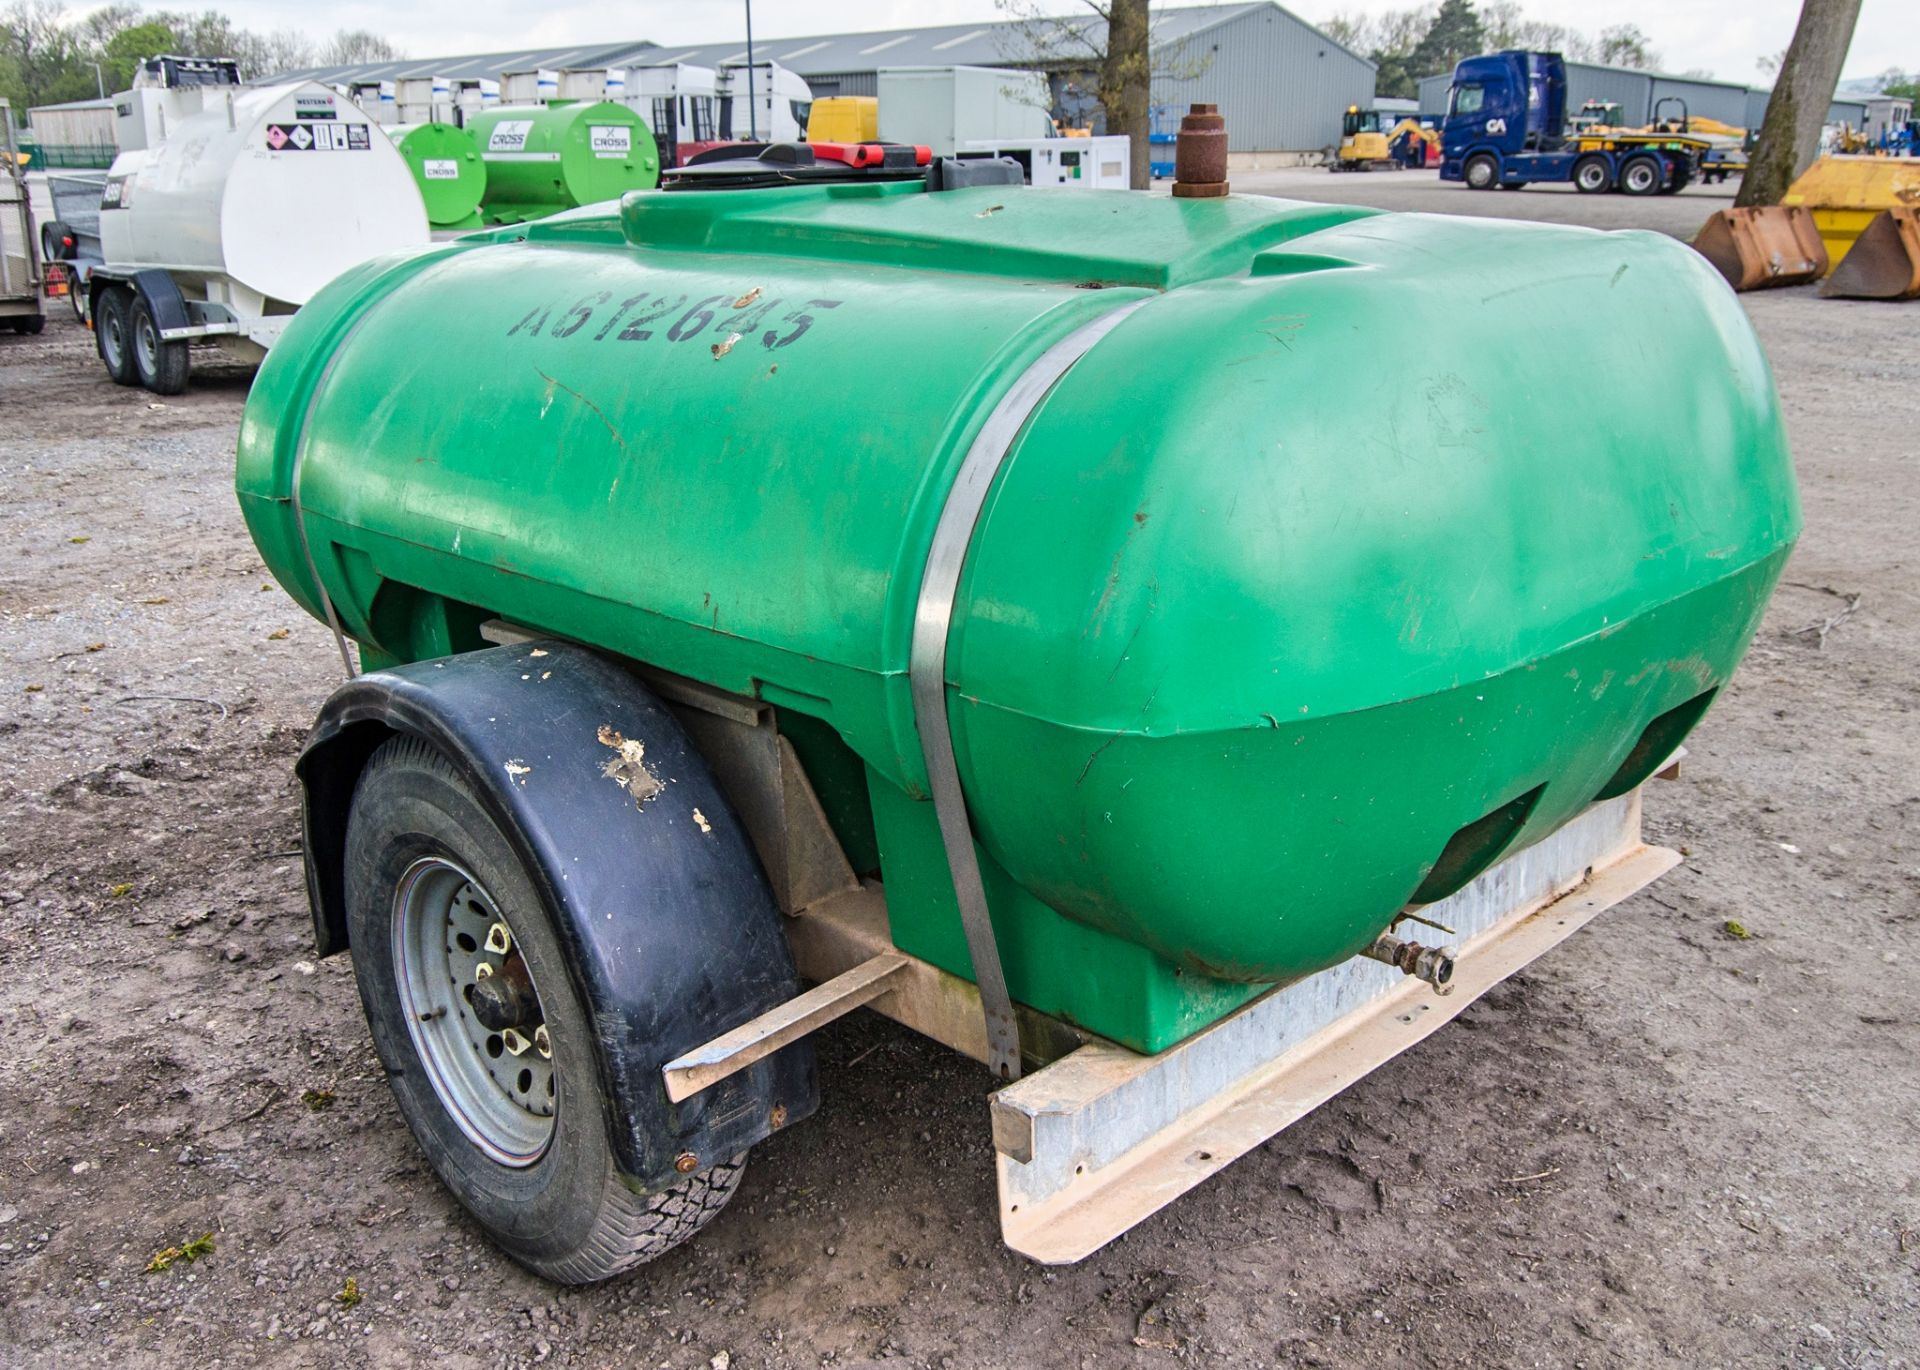 Trailer Engineering 2000 litre fast tow mobile water bowser A612645 - Bild 4 aus 6